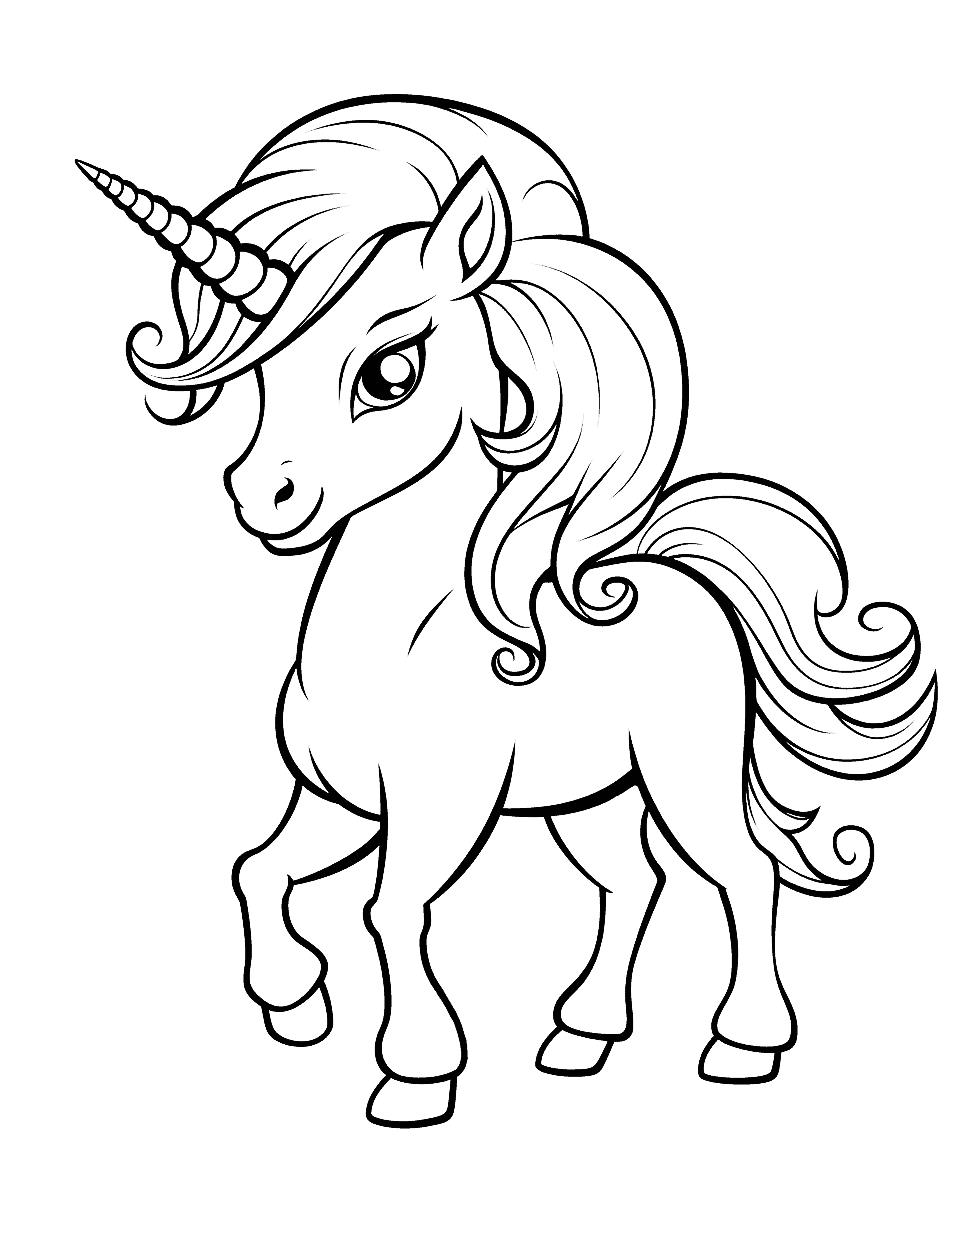 Anime Unicorn Coloring Page - An Anime-styled unicorn, complete with expressive eyes and dynamic positioning, ready for an anime coloring adventure.